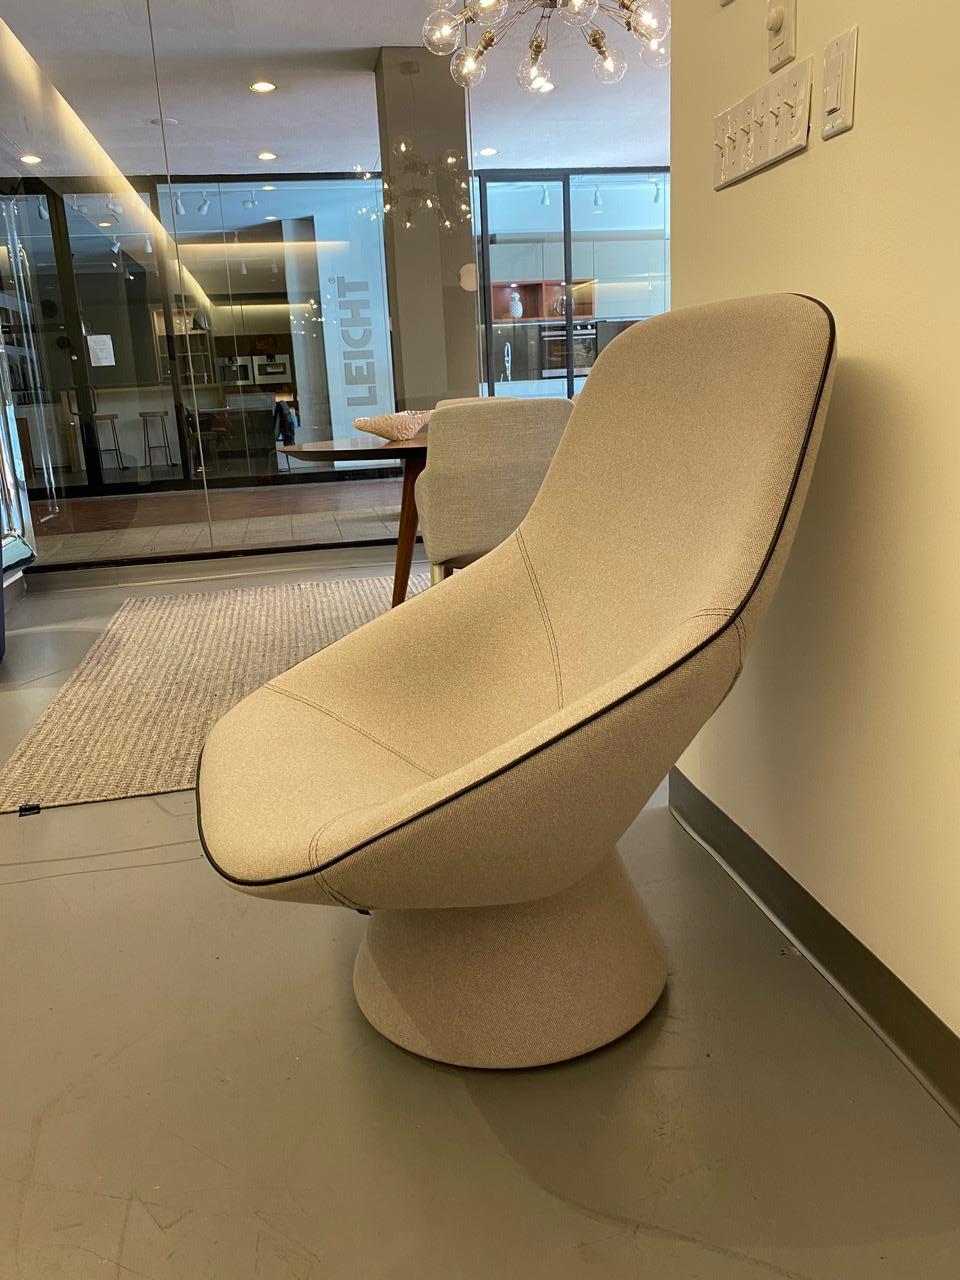 Pala Swivel chair
Artifort Selecte 130 fabric with black leather piping.
Pala is a fully upholstered armchair on a pedestal designed by Italian designer Luca Nichetto. The design follows the shape of a human body and combines Artifort’s heritage